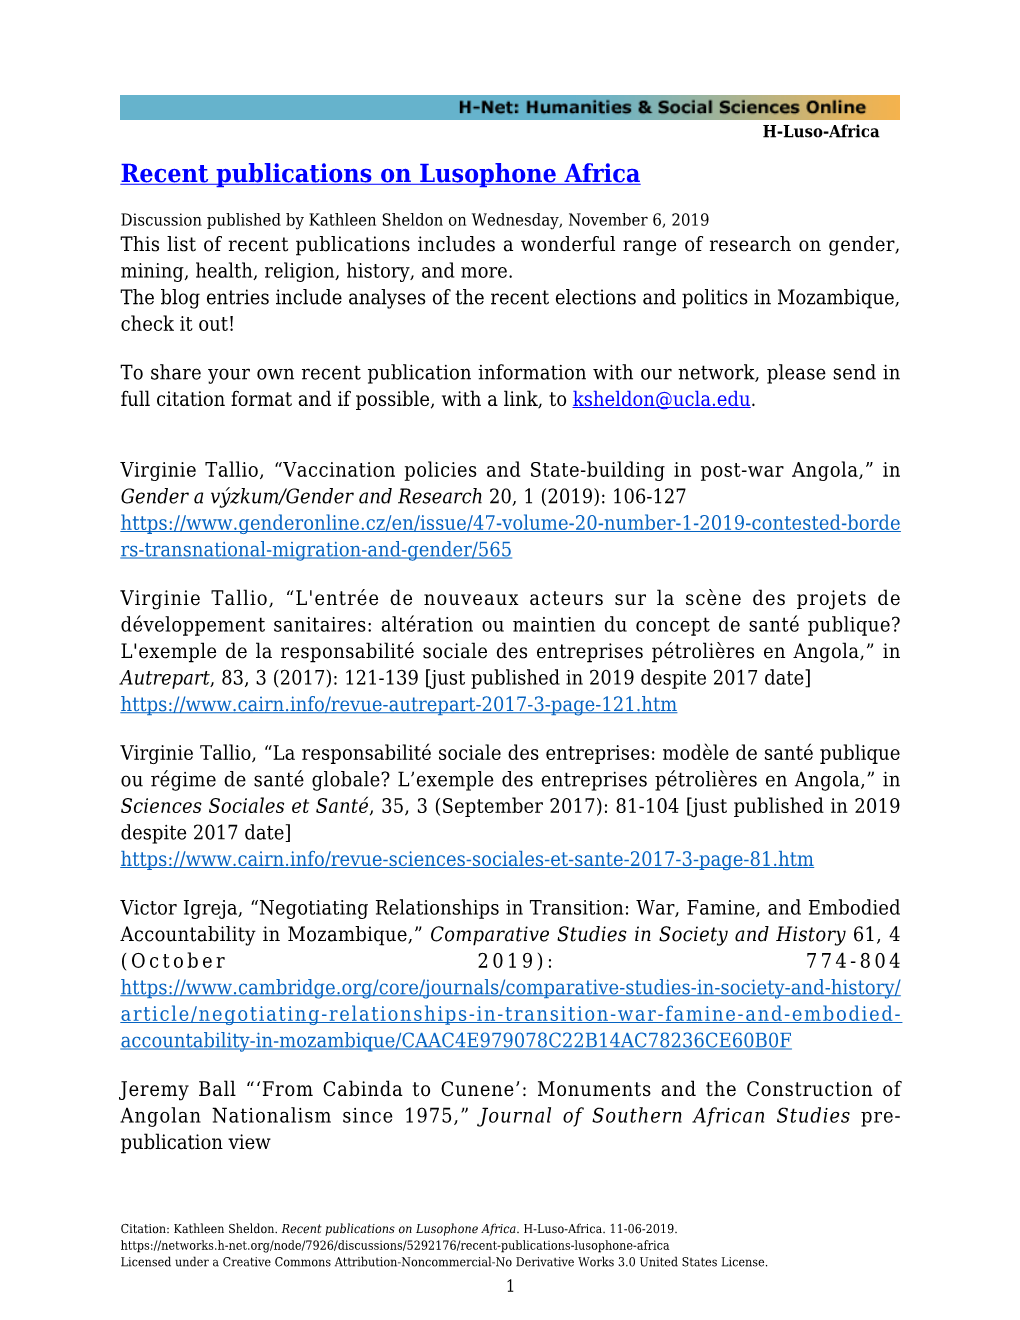 Recent Publications on Lusophone Africa